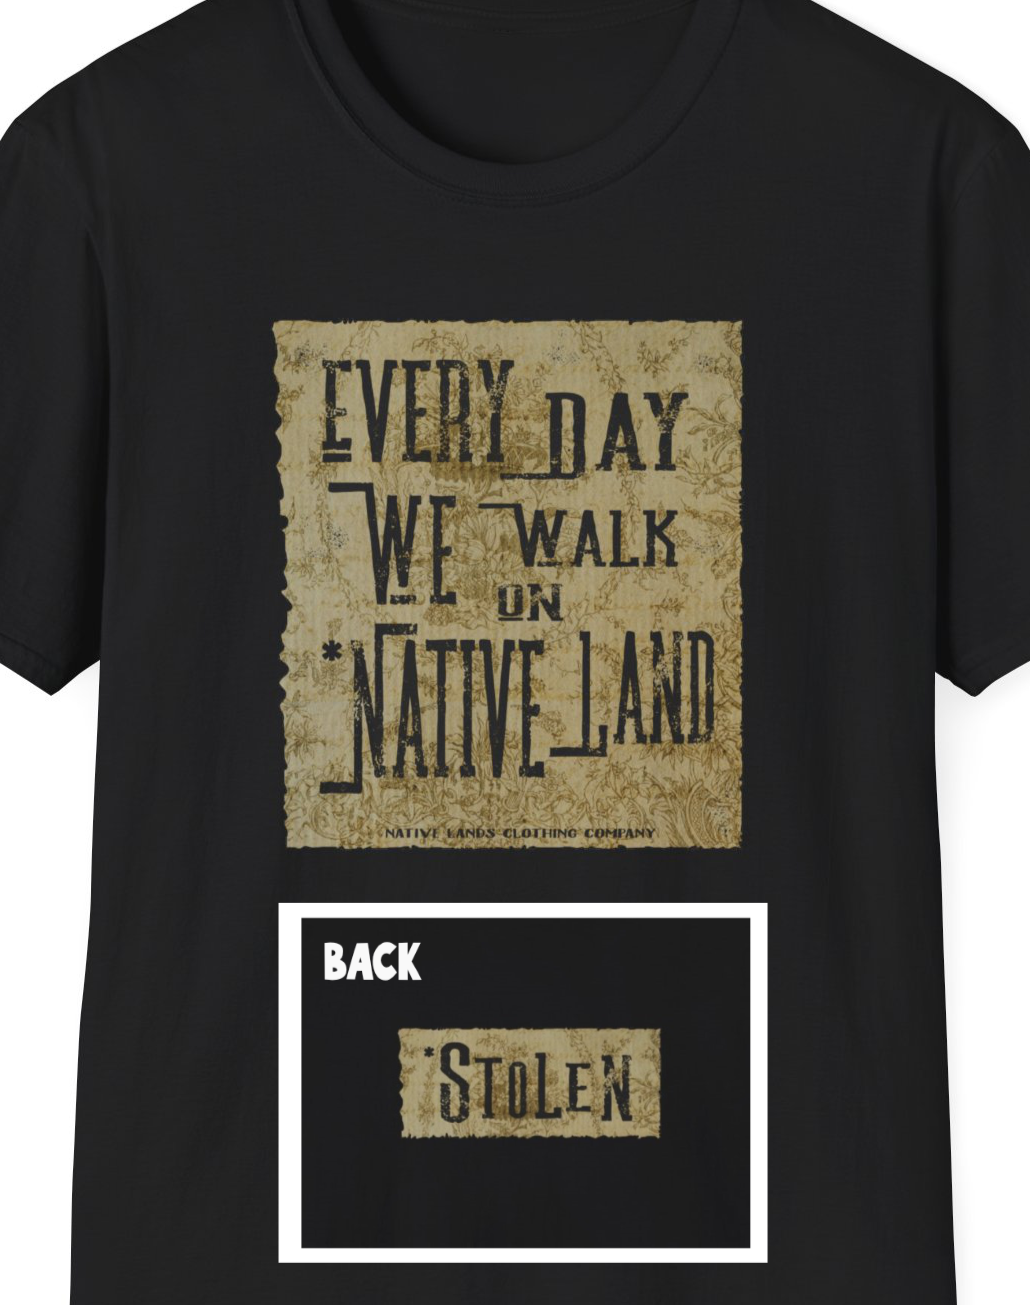 Every Day We Walk On Native Land シャツ (表/裏) コットン ネイティブ アメリカン